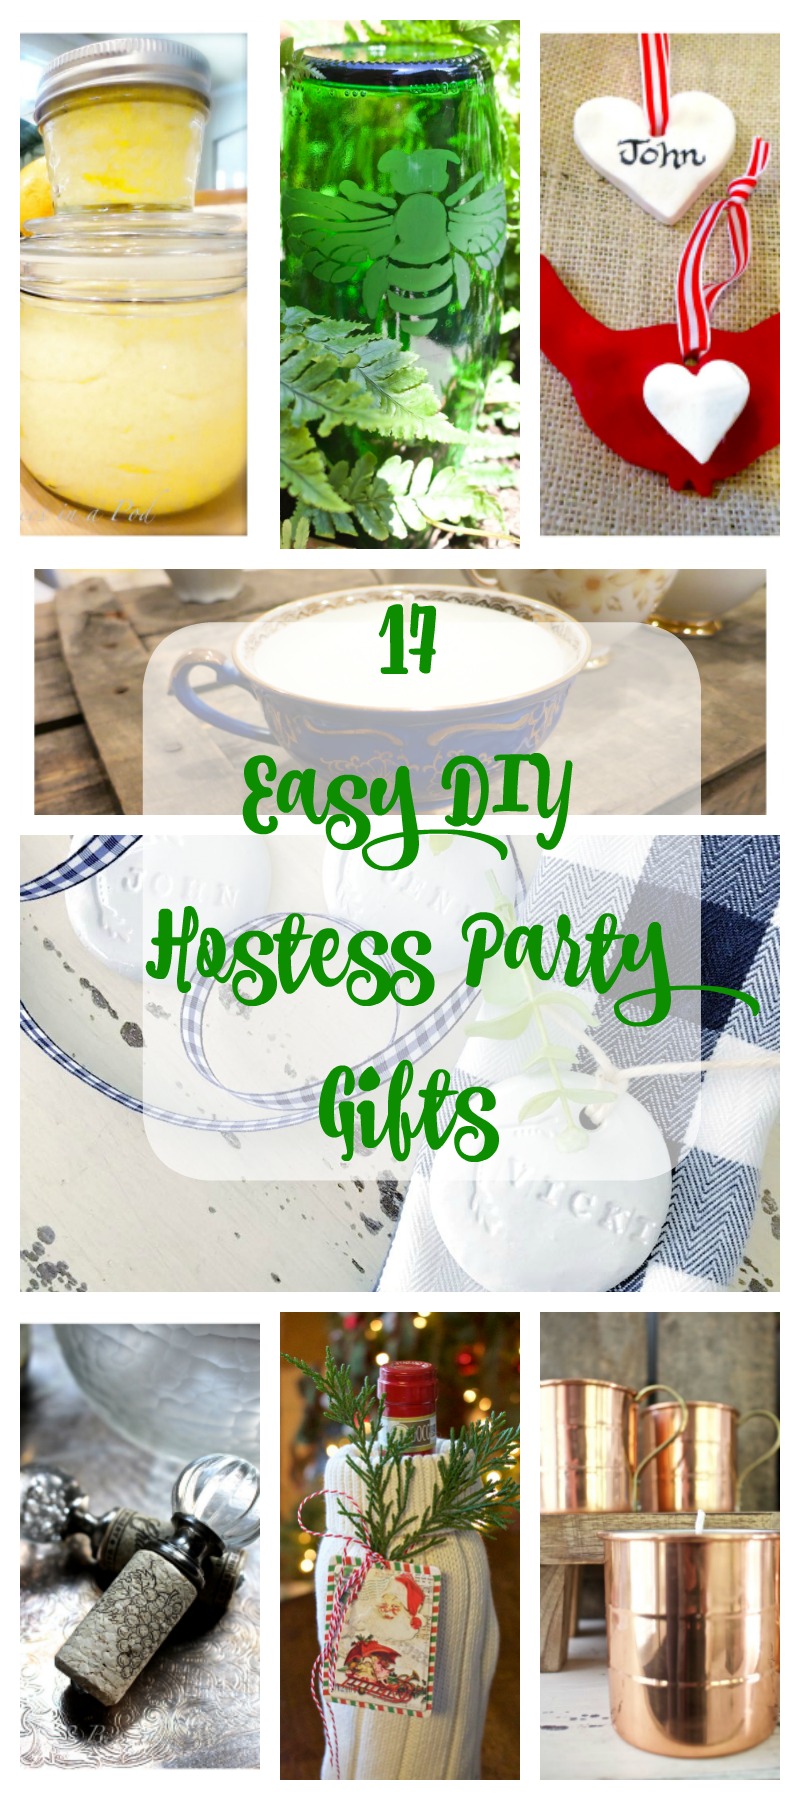 17 Ideas for Easy DIY Holiday Hostess Gifts